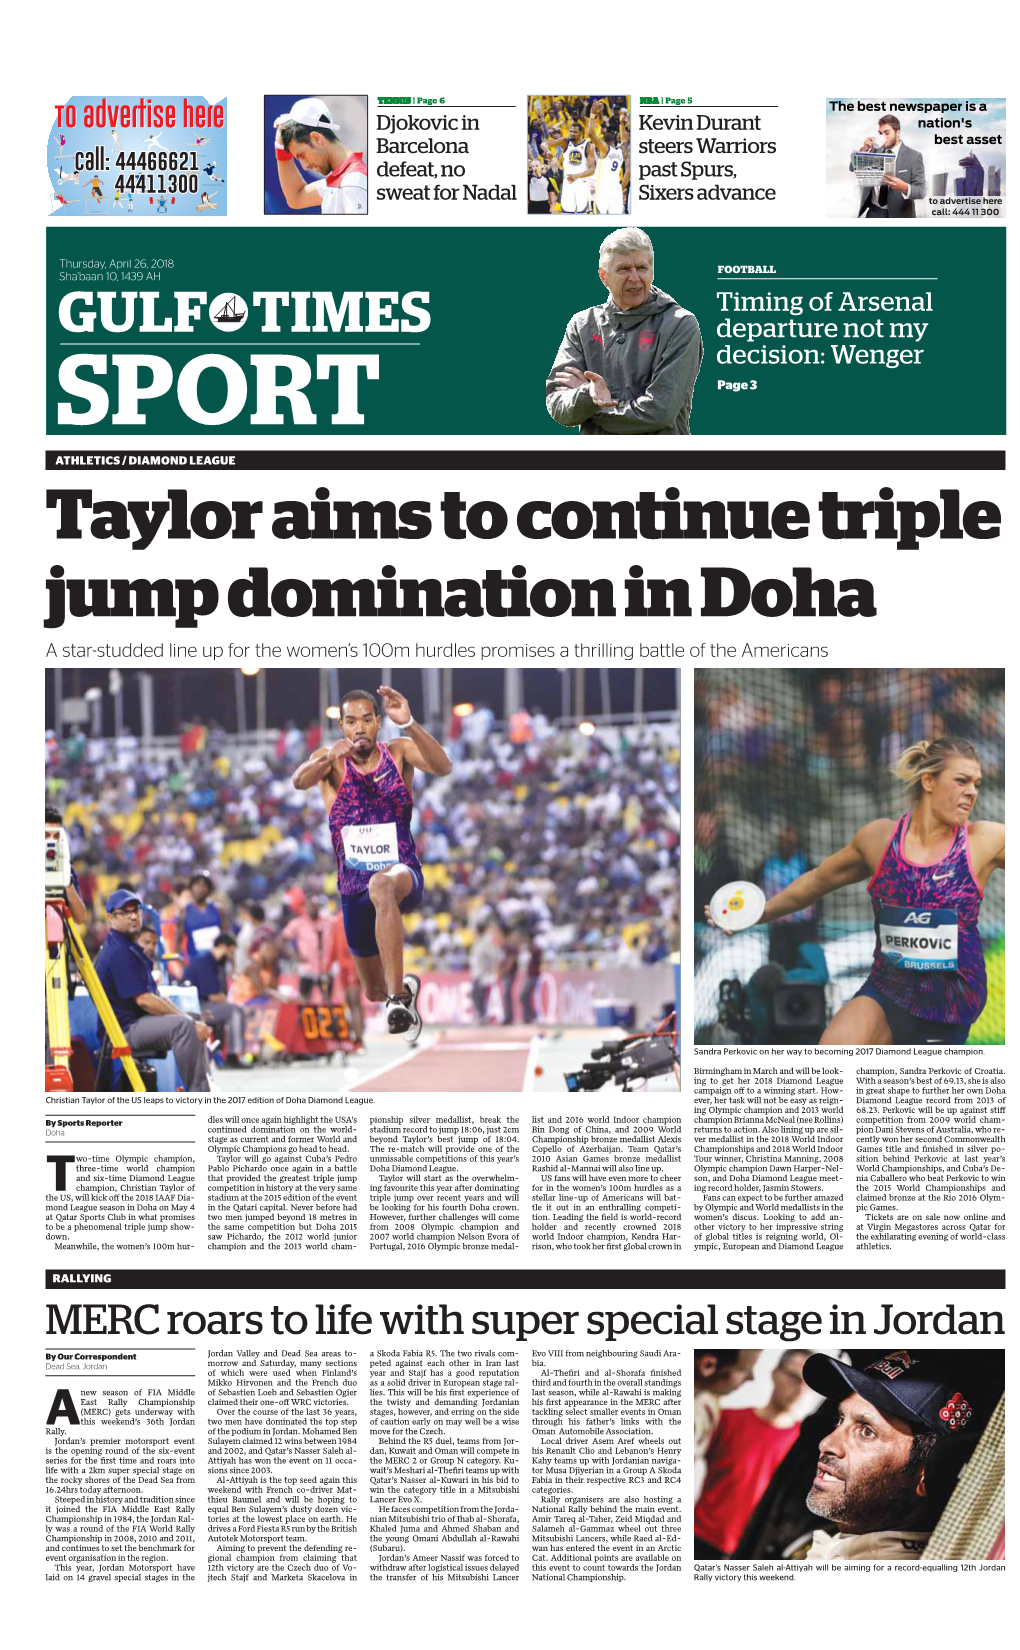 Taylor Aims to Continue Triple Jump Domination in Doha a Star-Studded Line up for the Women’S 100M Hurdles Promises a Thrilling Battle of the Americans